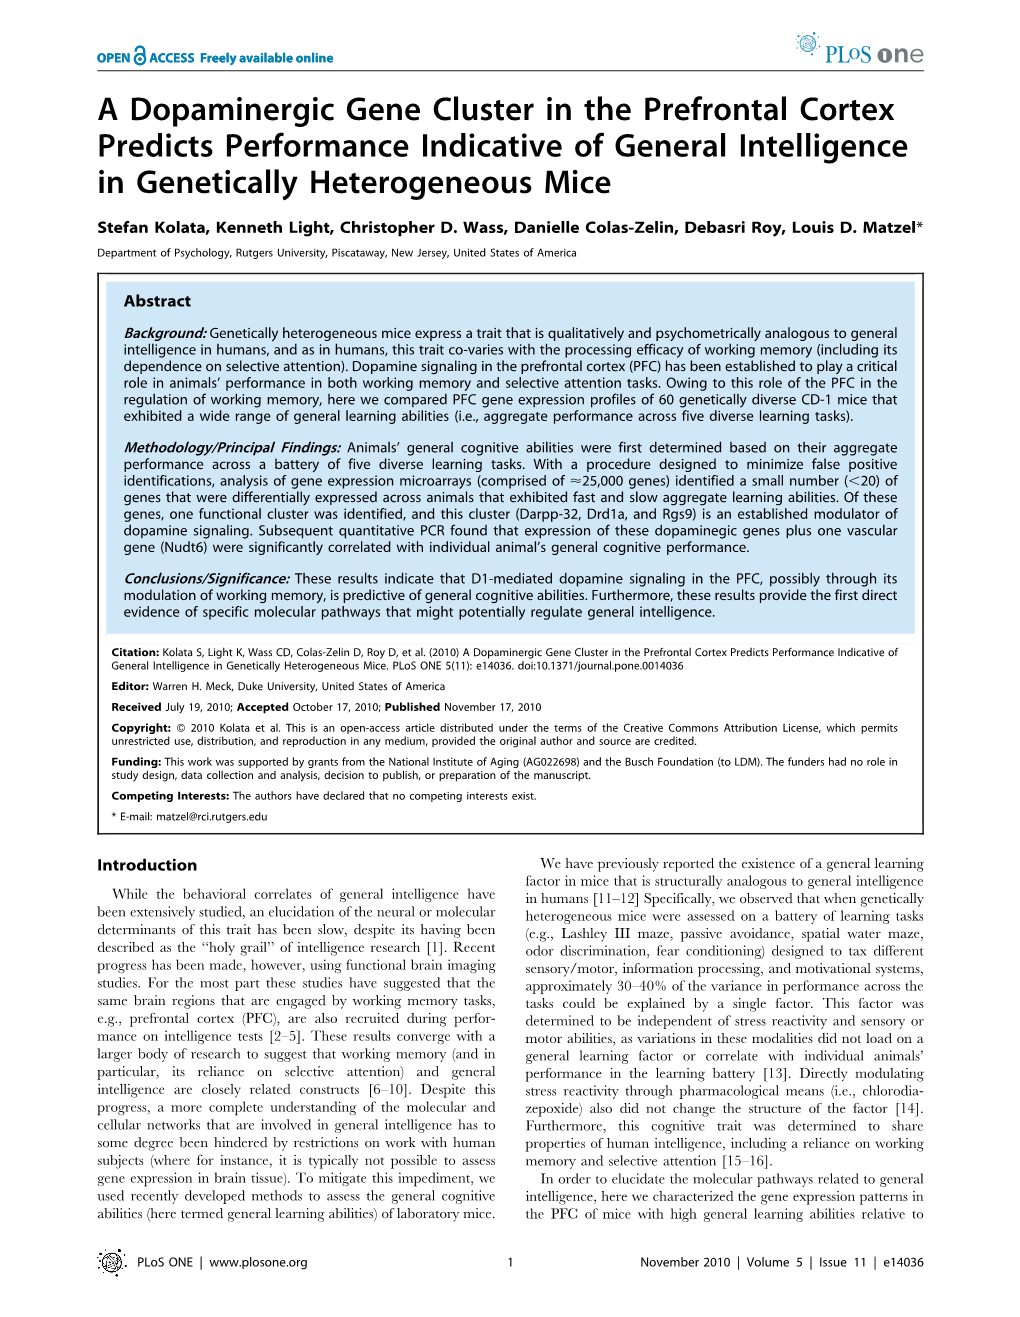 A Dopaminergic Gene Cluster in the Prefrontal Cortex Predicts Performance Indicative of General Intelligence in Genetically Heterogeneous Mice